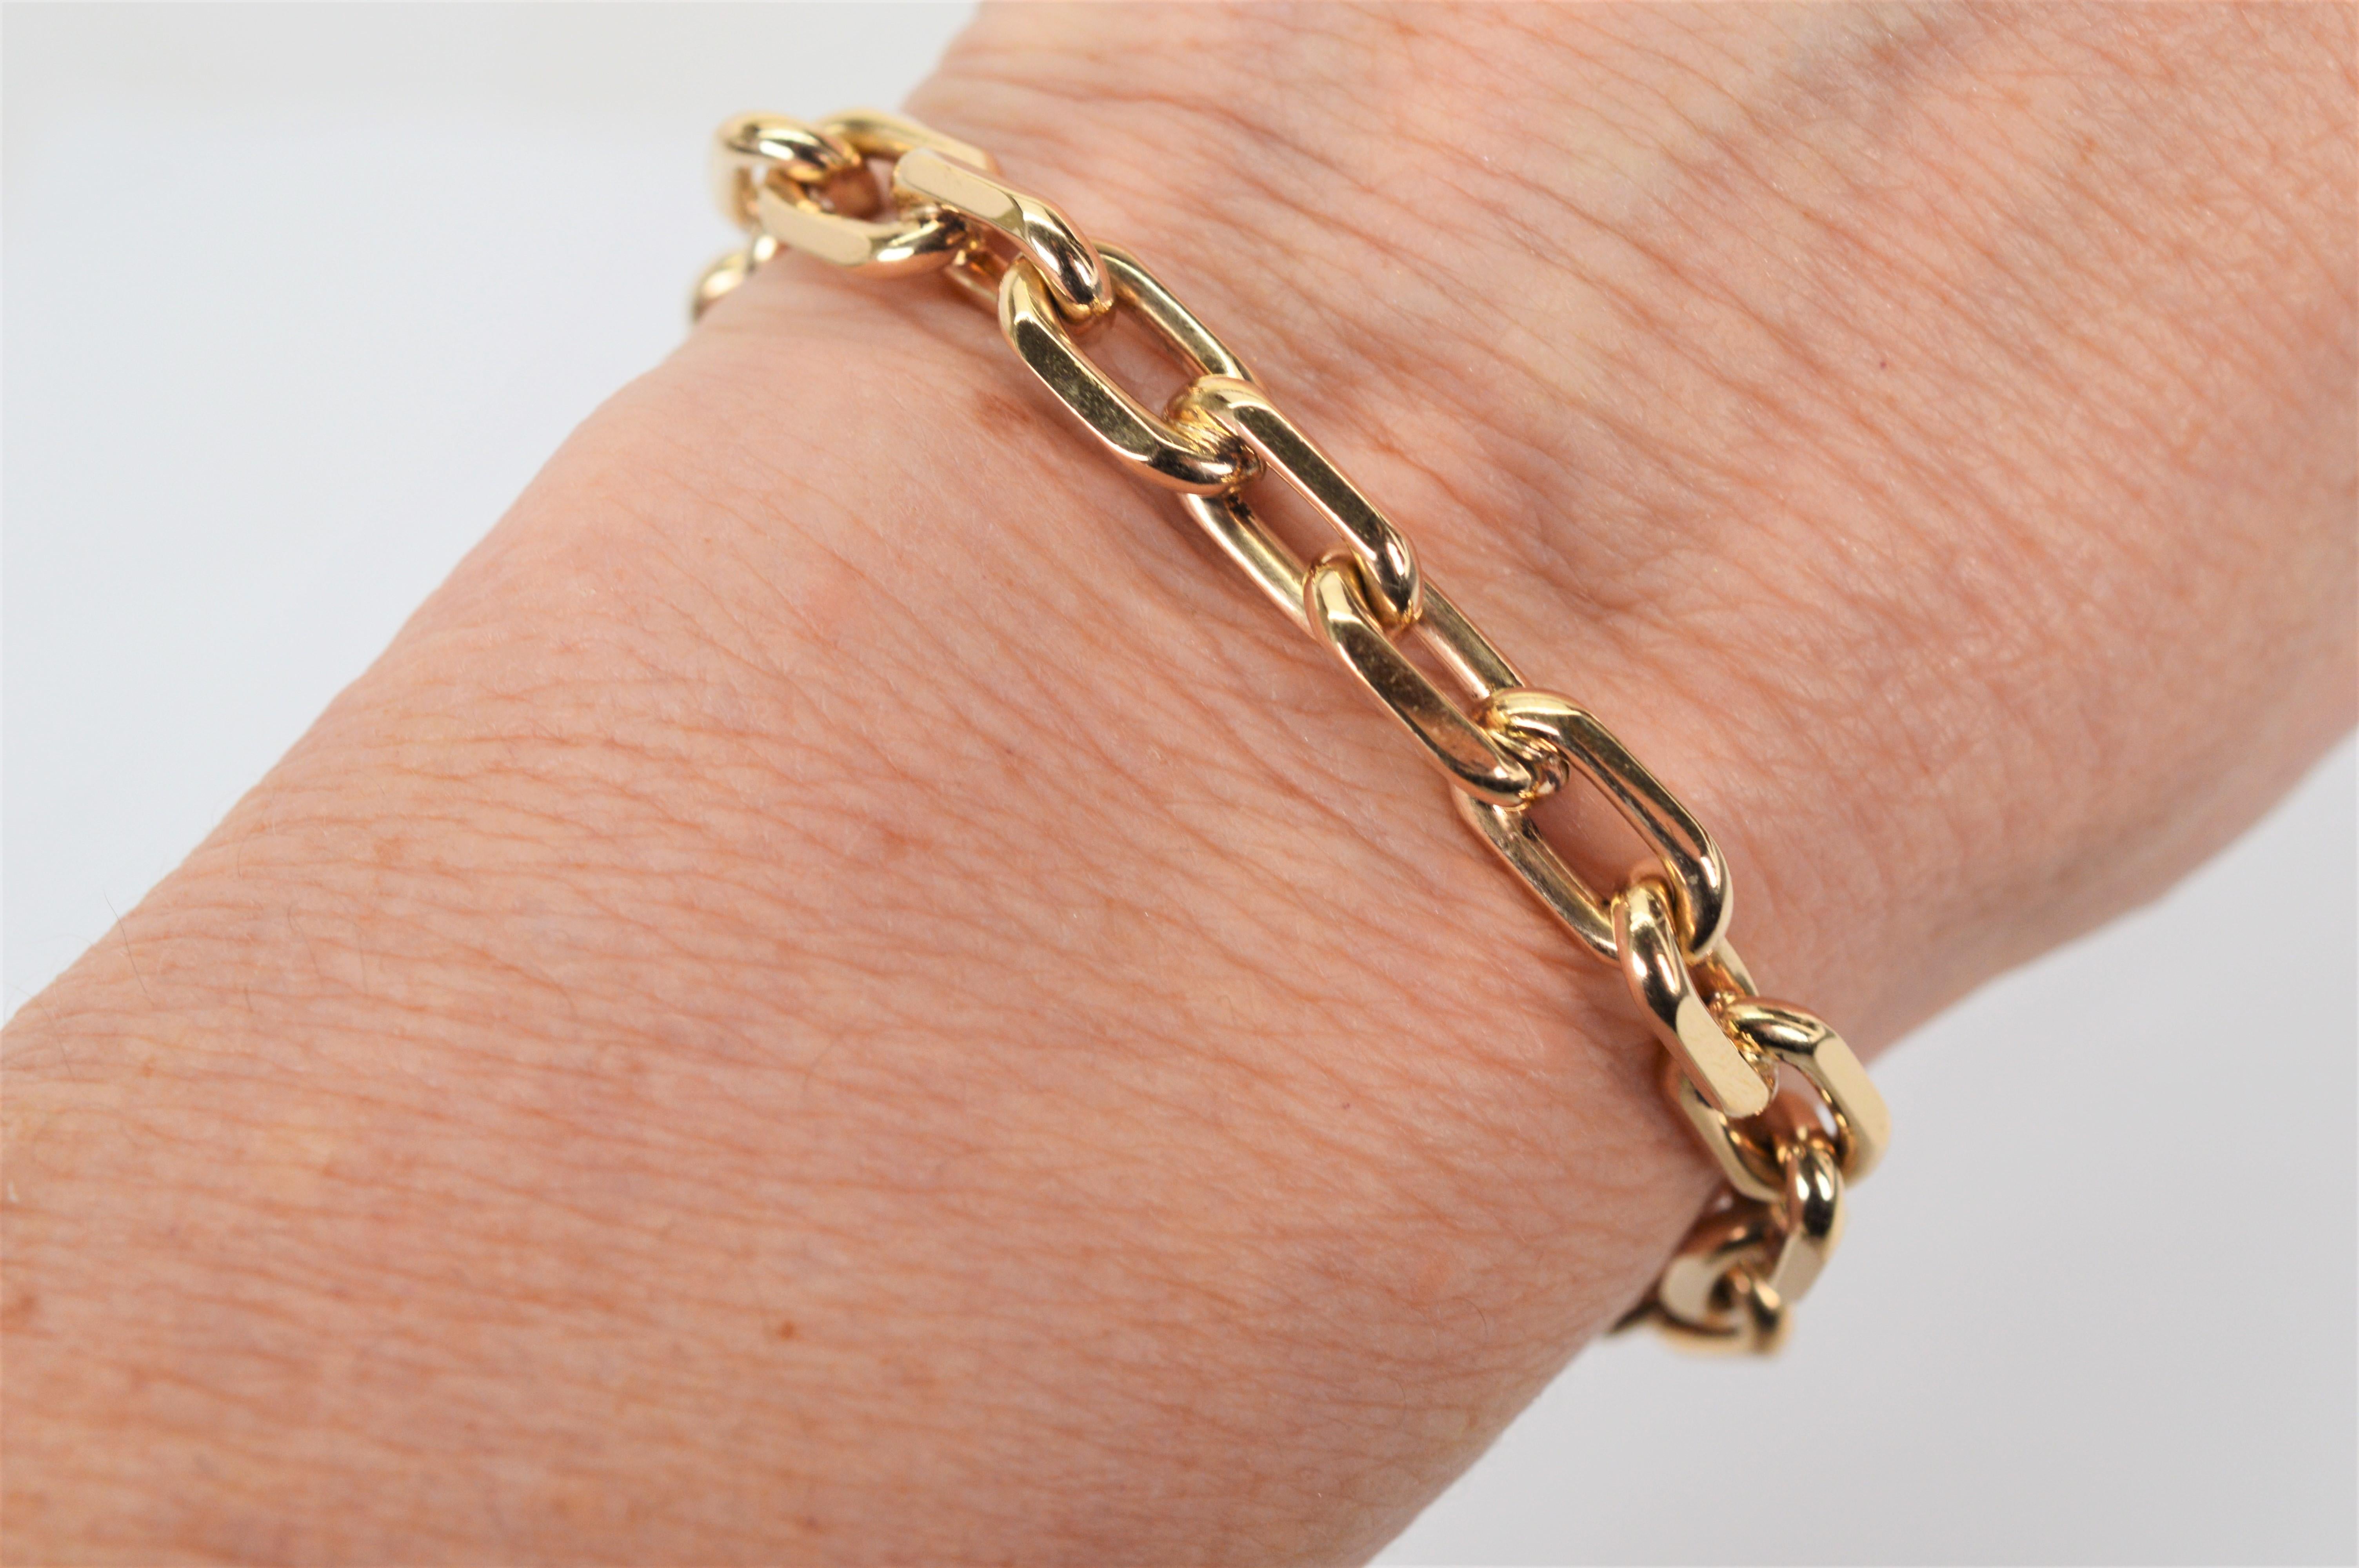 On trend in 14 karat yellow gold, heavy gauge interlocking 1/2 x1/4 inch elongated links create this 7-1/2 inch bracelet. Angled details of the gold links have a satin finish. This attractive piece is finished with a spring ring clasp. Gift boxed. 